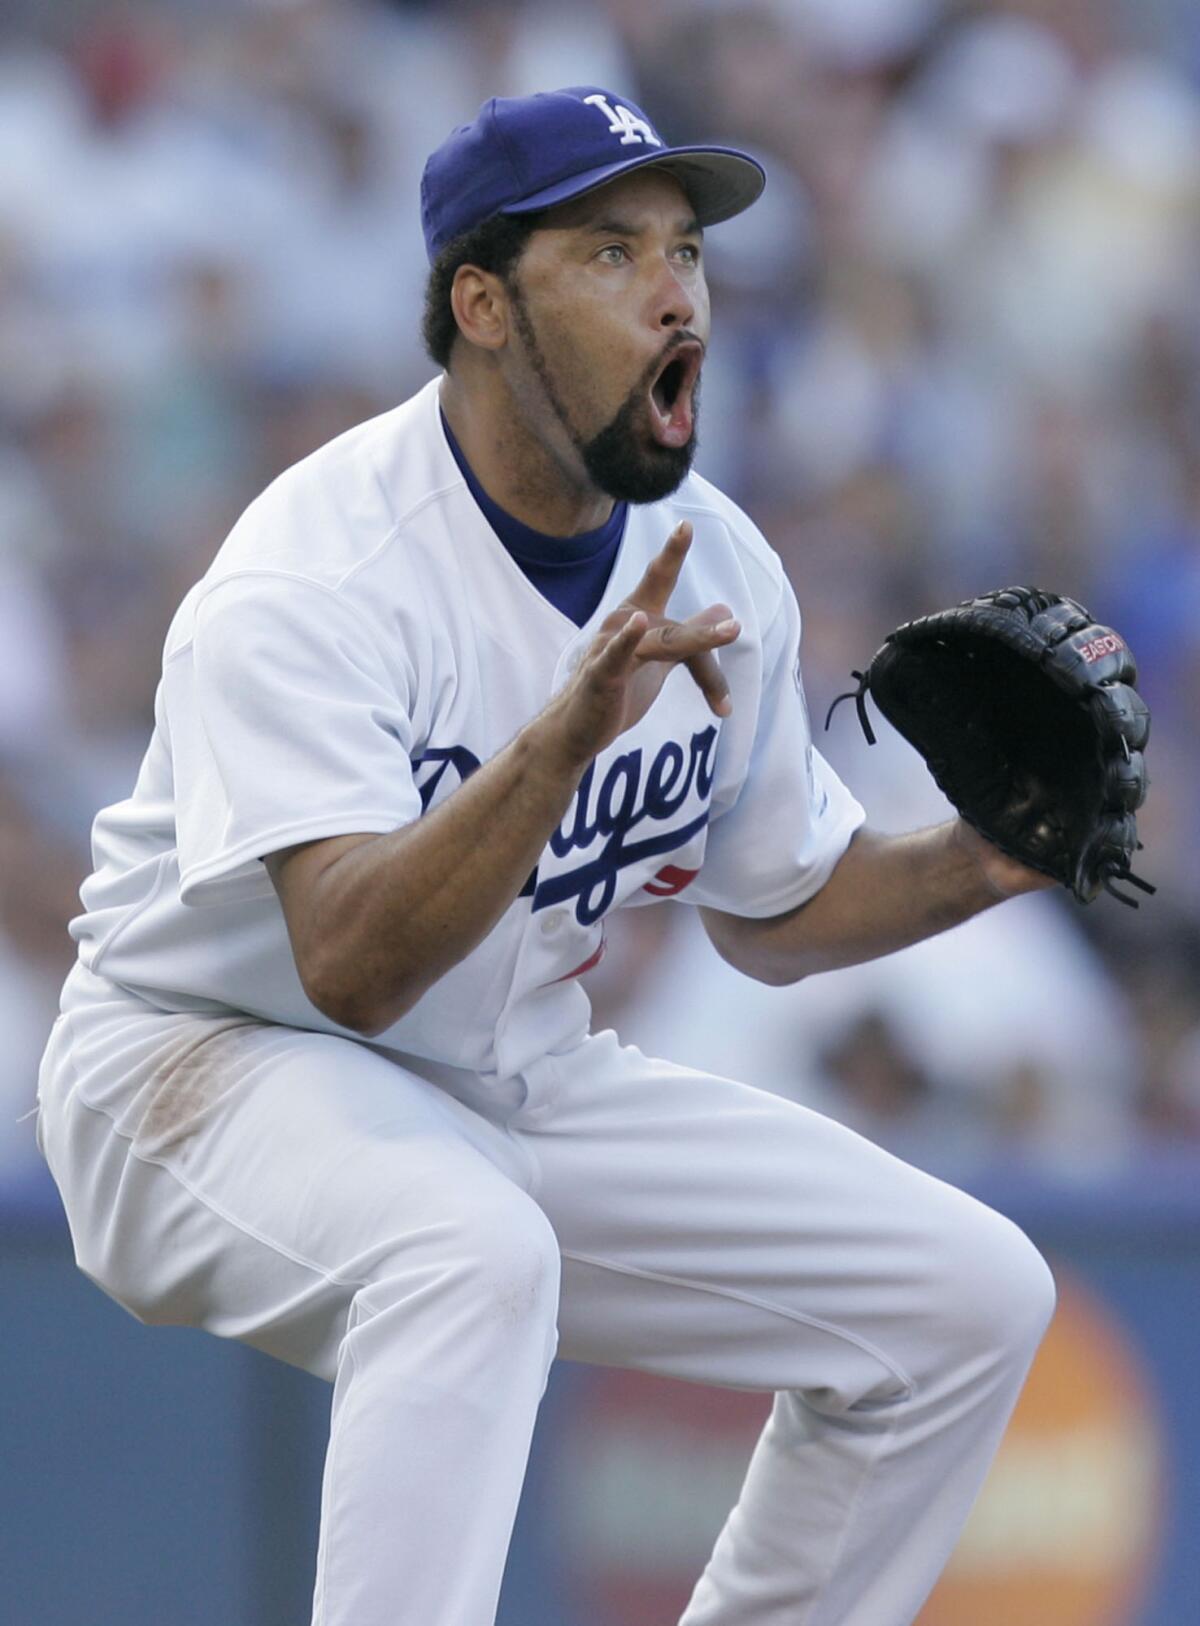 Dodgers starting pitcher Jose Lima reacts after striking out Scott Rolen of the St. Louis Cardinals.